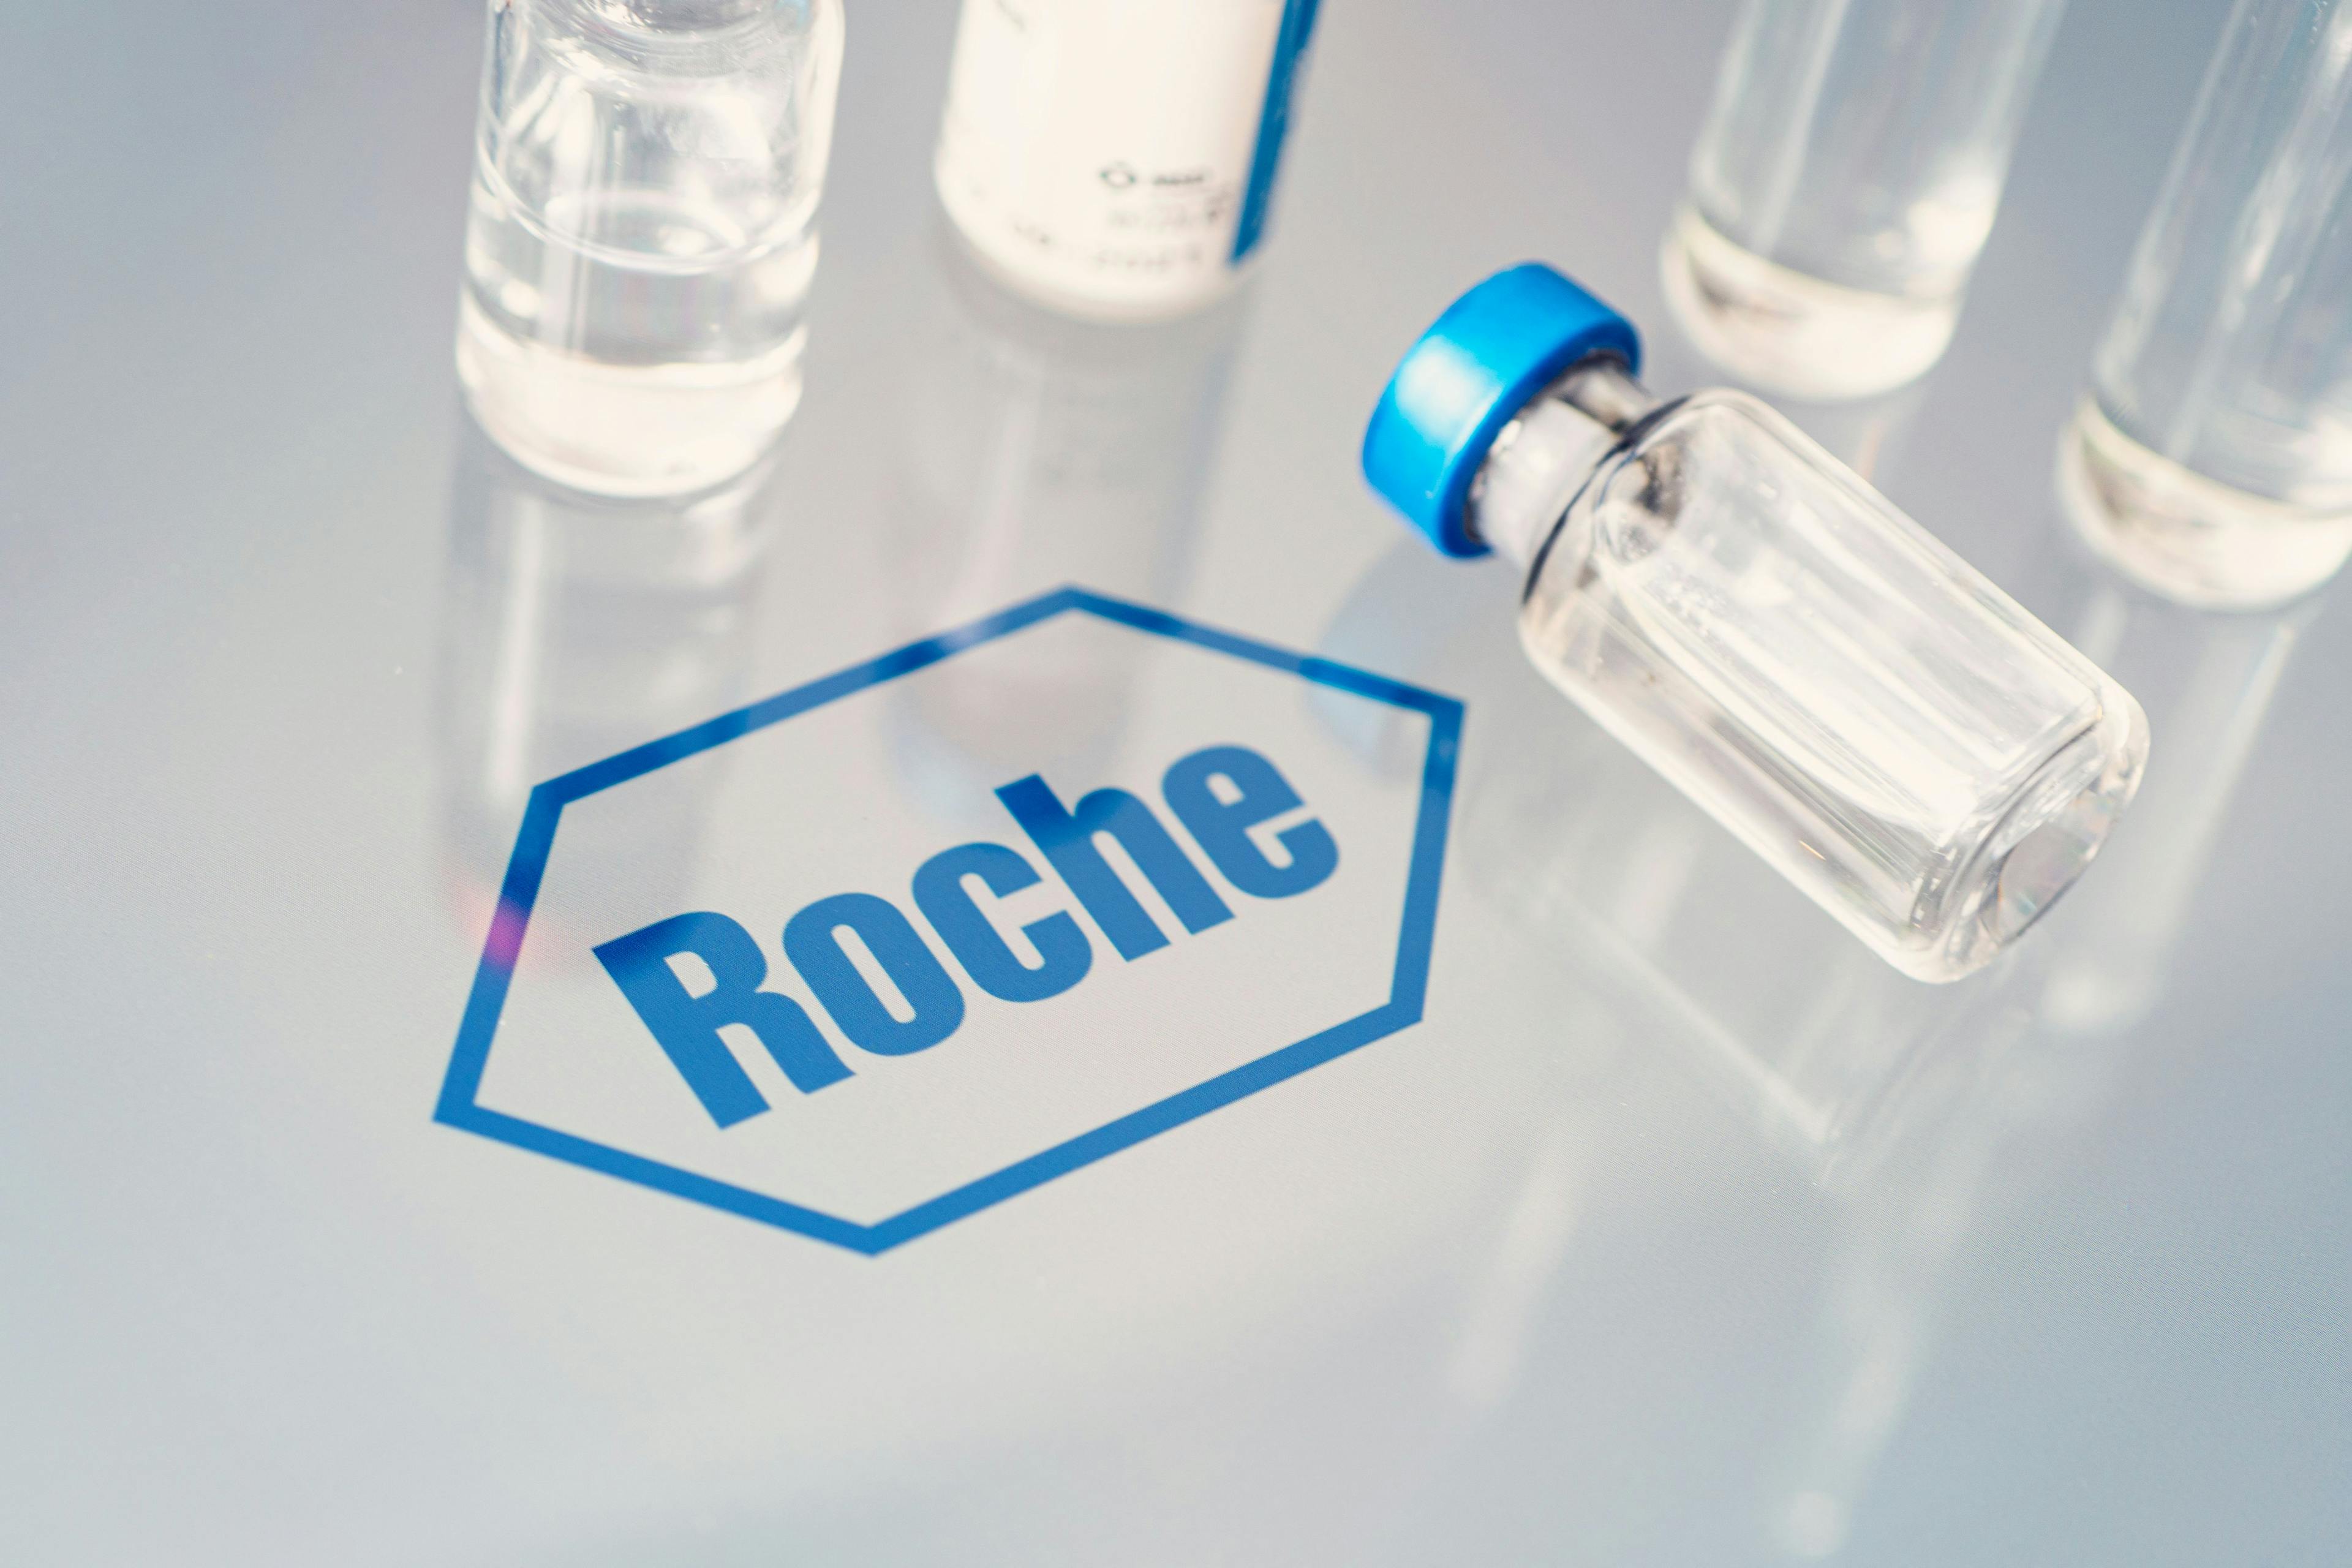 Vials of liquid on a white table and the logo of a large pharmaceutical company Roche.